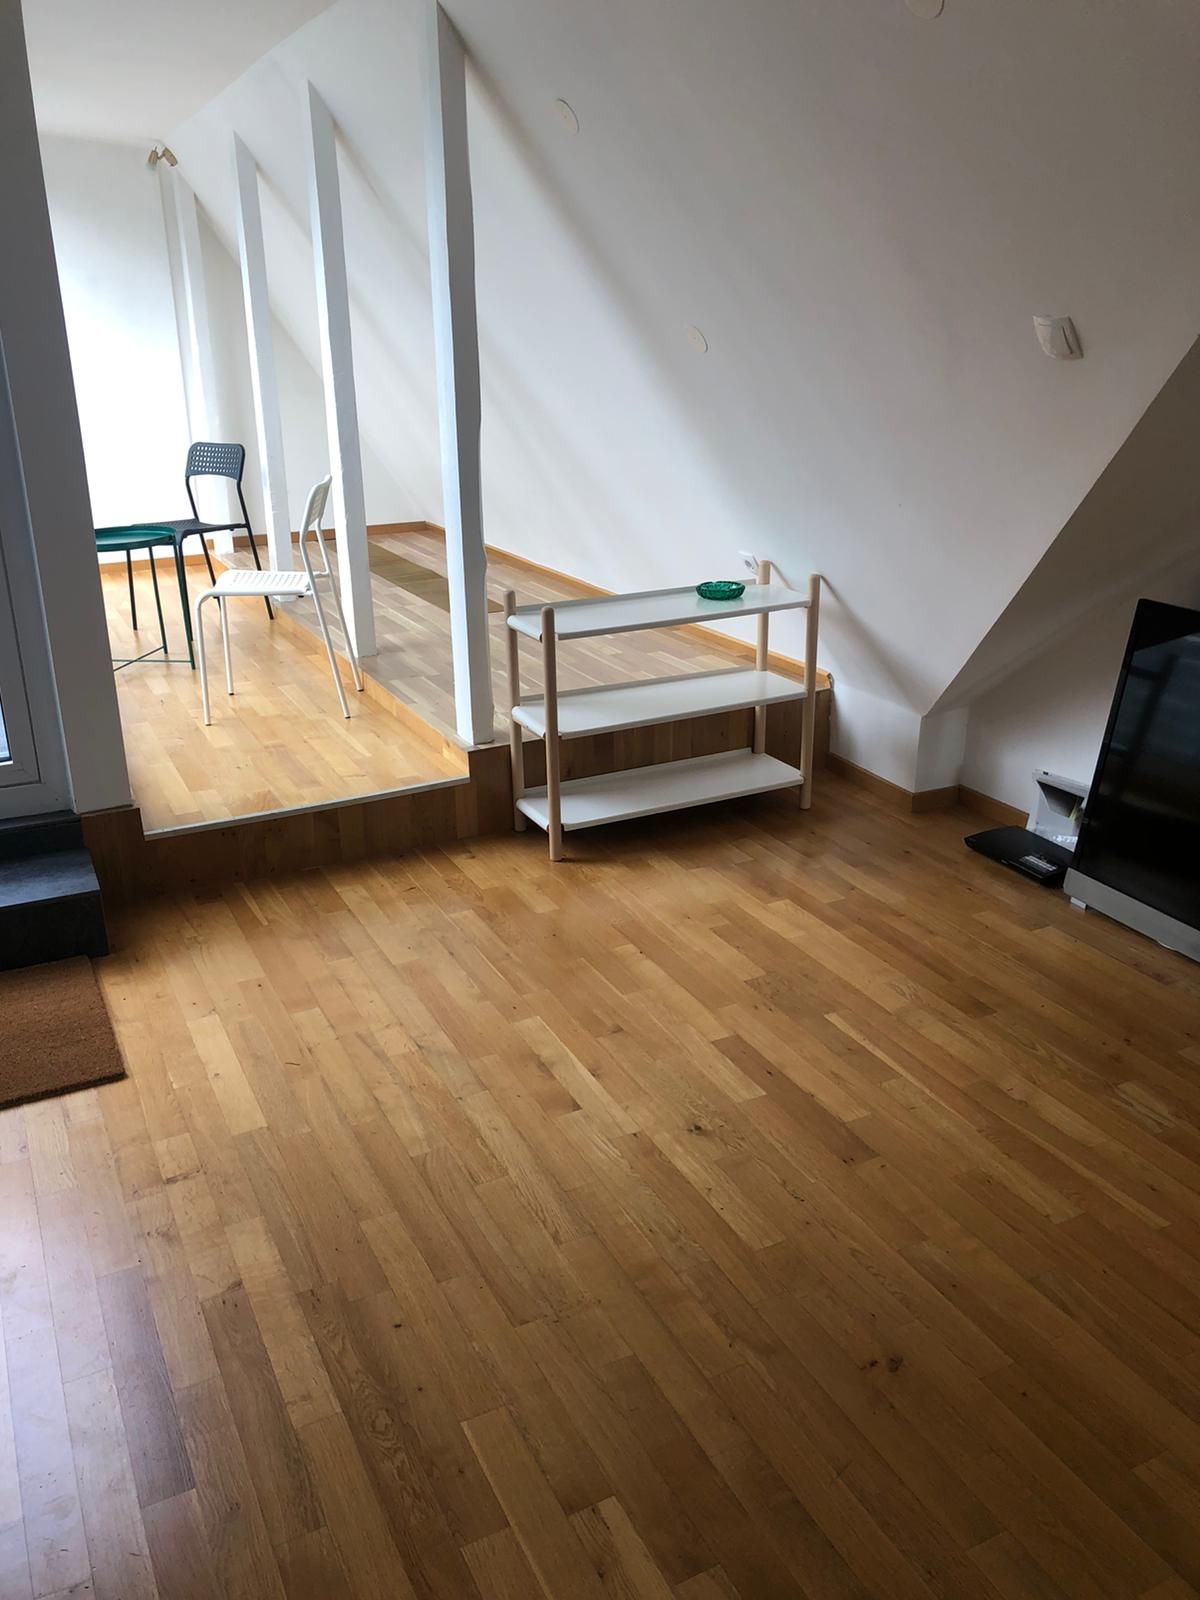 Awesome flat in nice area